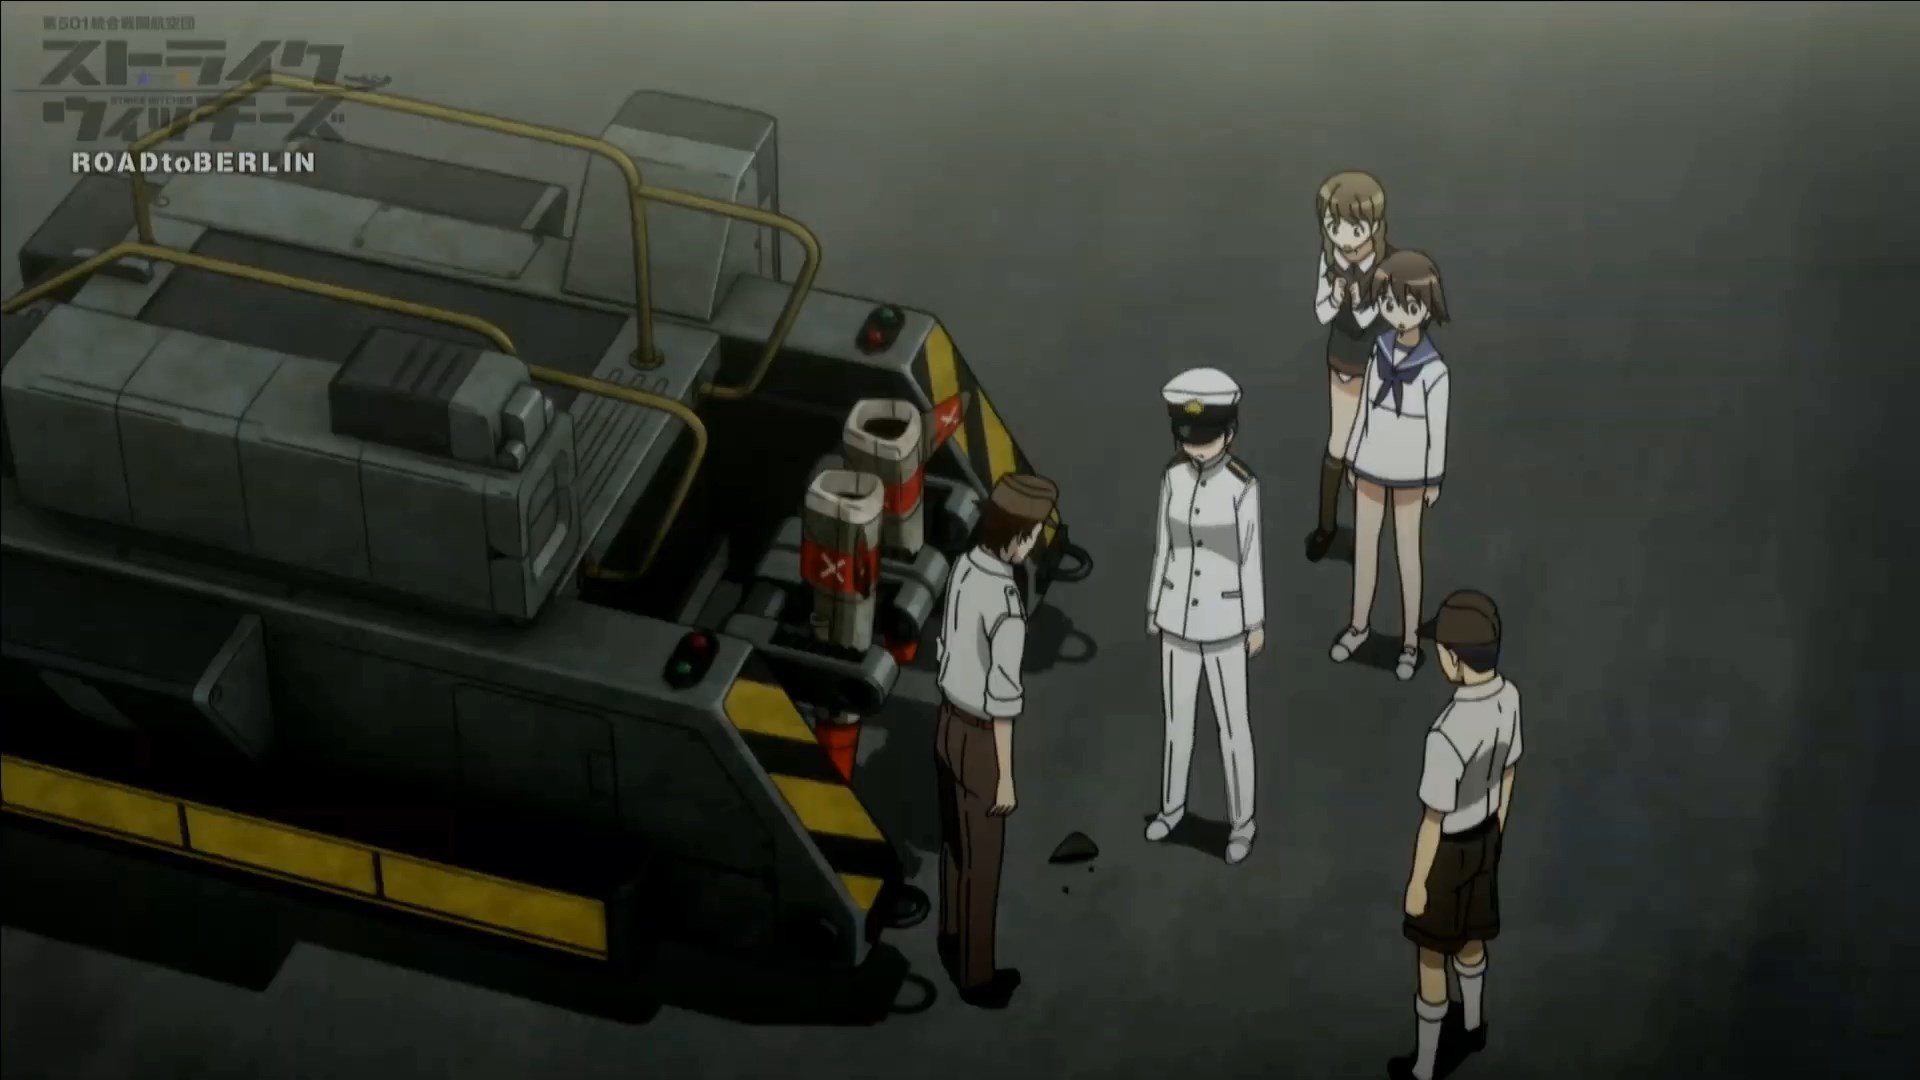 Strike Witches: Road to Berlin - 03 - Random Curiosity